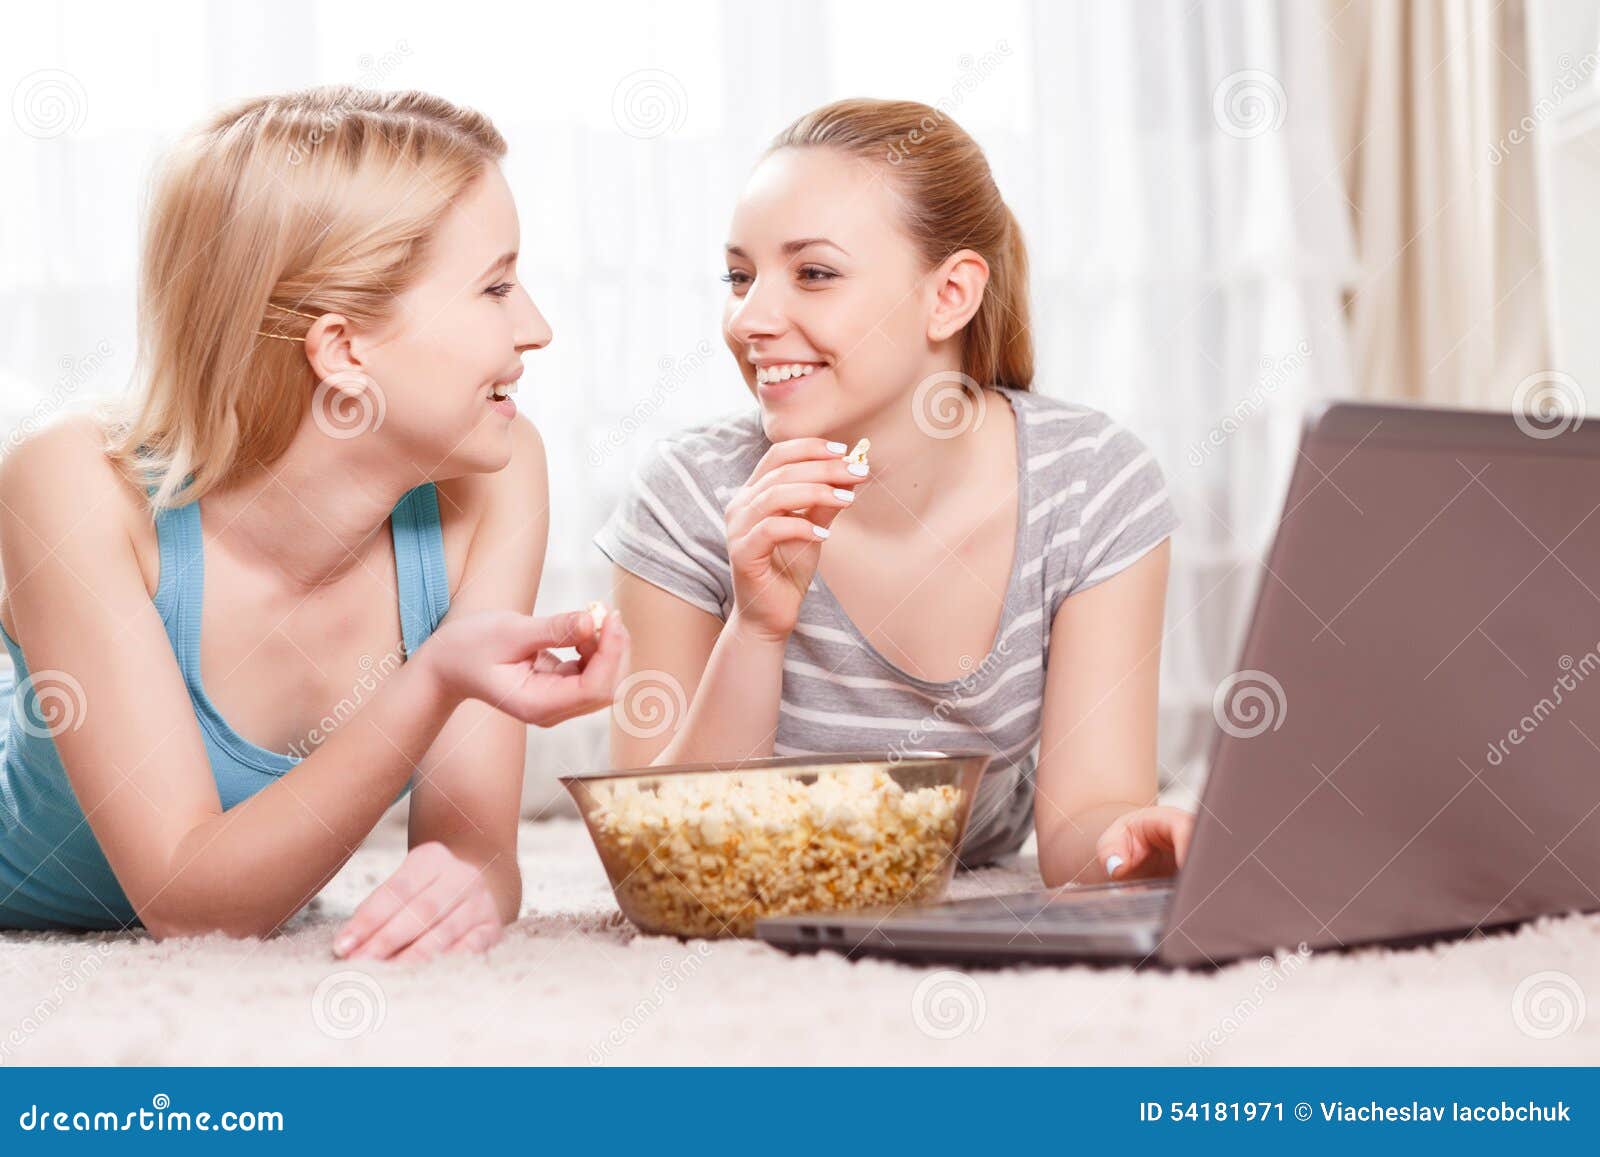 girls eating each other